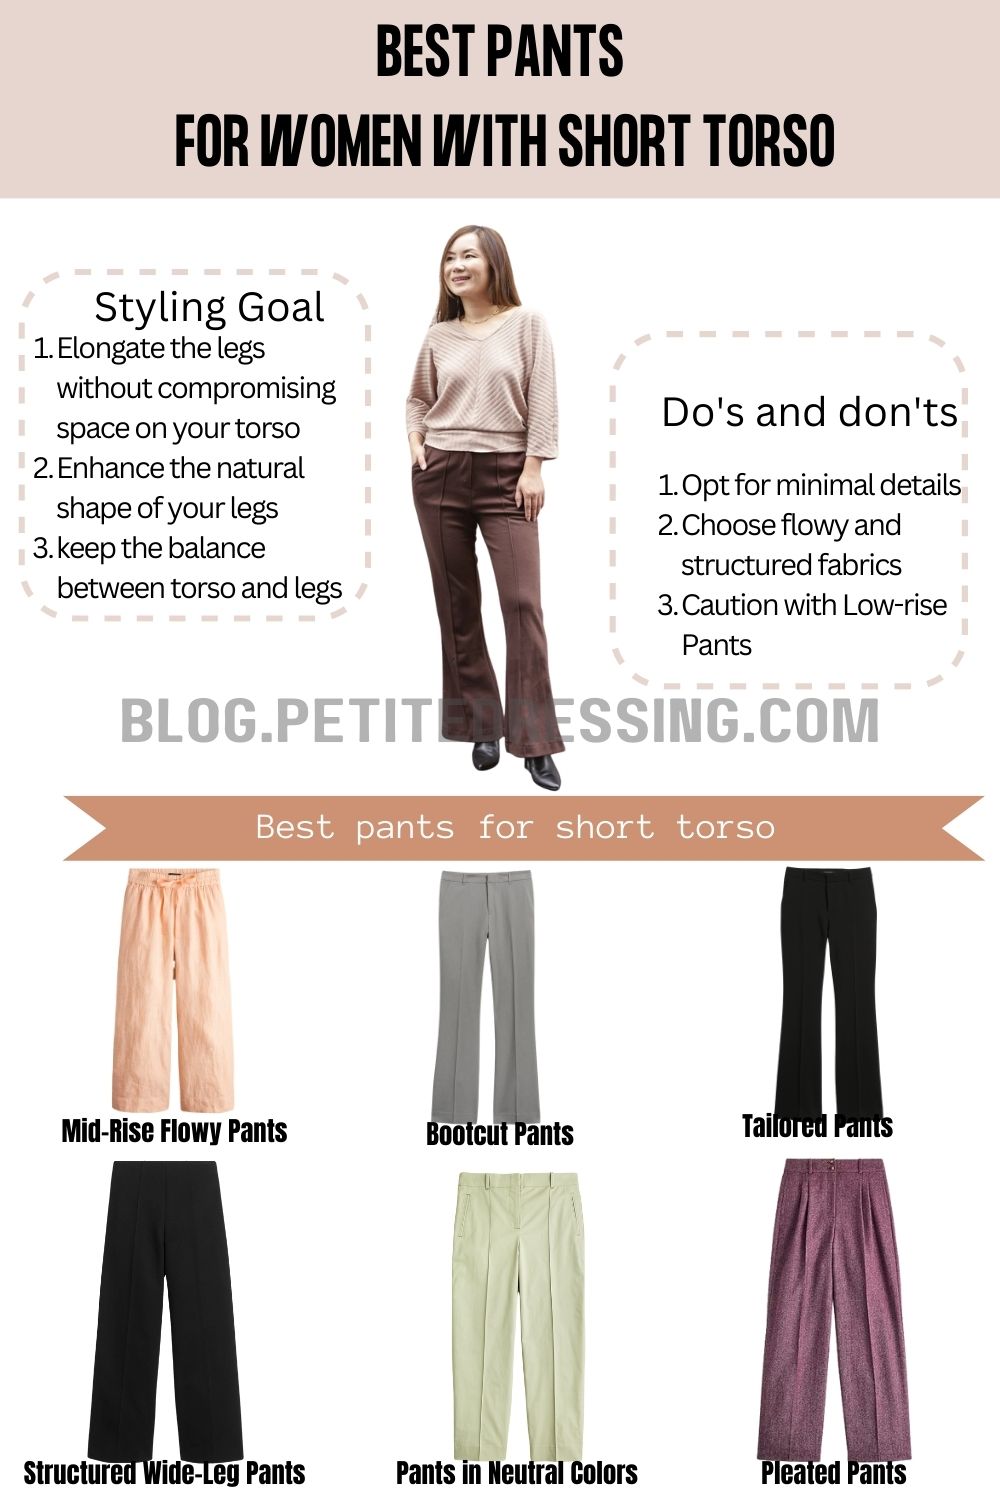 Long Torso - Short Legs. How to fit pants so that proportions look right?